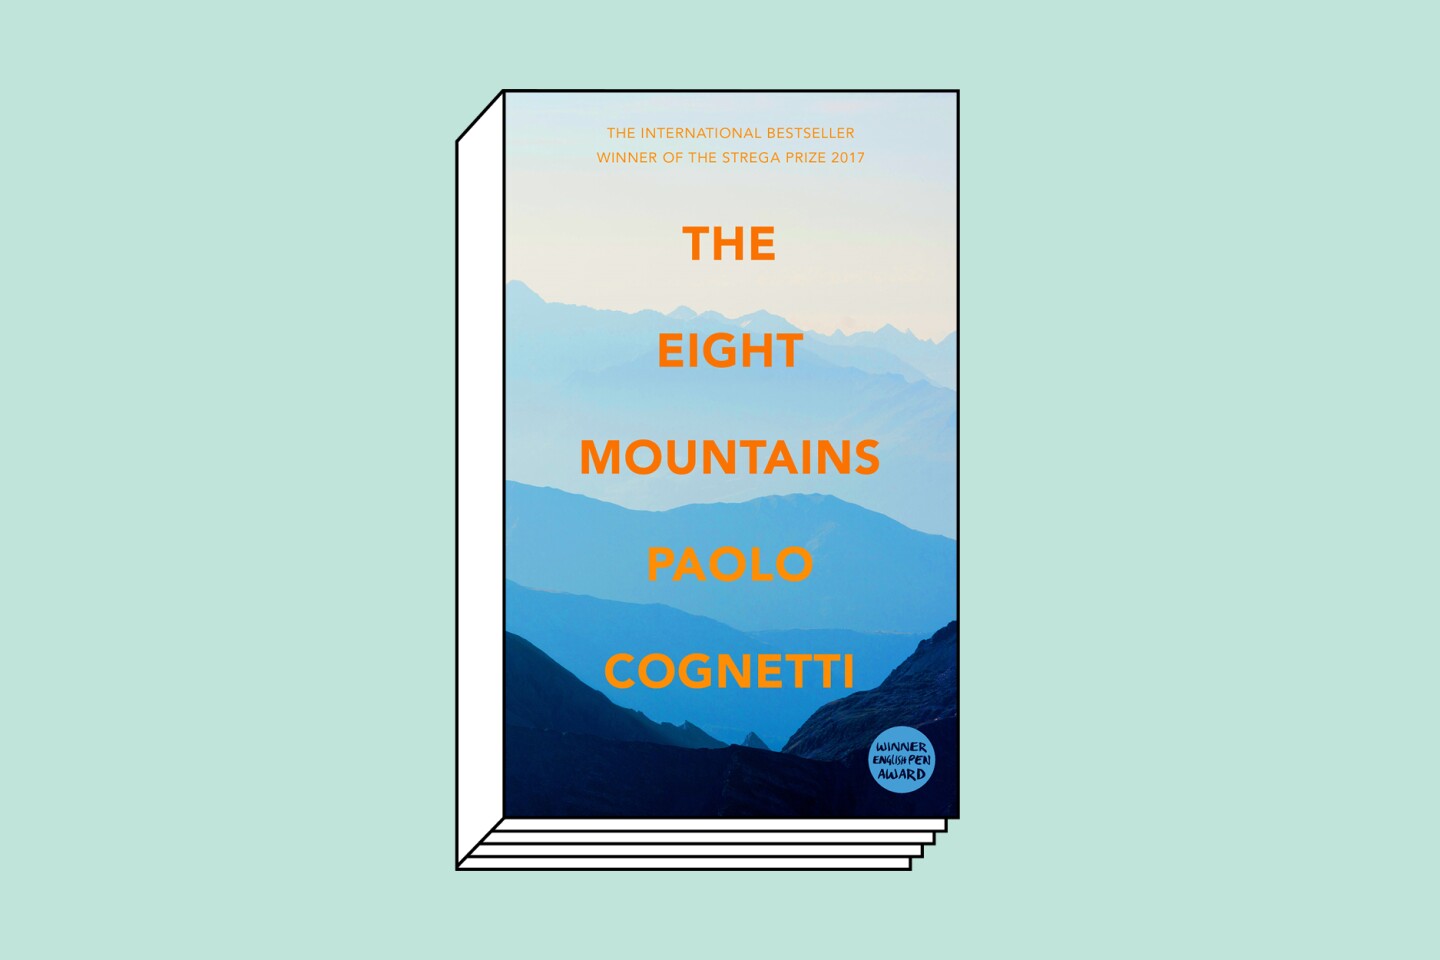 <h2>“The Eight Mountains” by Paolo Cognetti (2017)</h2> <ul>   <li><b>Buy now</b>: <a class="Link" href="https://bookshop.org/p/books/the-eight-mountains-paolo-cognetti/6772929?ean=9781501169892" rel="noopener nofollow sponsored">bookshop.org</a></li>  </ul> <p>The 2017 winner of Italy’s esteemed Strega Prize for fiction gets an English translation here. The first-person novel revolves around Pietro, a boy from <a class="Link" href="https://www.afar.com/travel-guides/italy/milan/guide" rel="noopener">Milan</a>, and the friendship he develops with Bruno, a boy whom he meets while trekking in the Dolomites with his family. But it’s also a coming-of-age narrative that grapples with Pietro’s relationship with his father and the mountains they both love.</p> <h2>“Renaissance Woman: The Life of Vittoria Colonna” by Ramie Targoff (2018)</h2> <ul>   <li><b>Buy now</b>: <a class="Link" href="https://bookshop.org/p/books/renaissance-woman-the-life-of-vittoria-colonna/18925026?ean=9780374538224" rel="noopener nofollow sponsored">bookshop.org</a></li>  </ul> <p> In this biography of Italian poet and noblewoman Vittoria Colonna, Dr. Ramie Targoff, professor of English at Brandeis University, peers into the life of one of the most remarkable women from the Renaissance. Targoff draws readers into the world of 16th-century Italy, exploring how Colonna became a sonneteer and befriended popes and artists alike (her most notable friendship was with Michelangelo himself).</p> <h2>“Everyone in Their Place” by Maurizio de Giovanni (2013)</h2> <ul>   <li><b>Buy now</b>: <a class="Link" href="https://bookshop.org/p/books/everyone-in-their-place-the-summer-of-commissario-ricciardi-maurizio-de-giovanni/11309624?ean=9781609451431" rel="noopener nofollow sponsored">bookshop.org</a></li>  </ul> <p>This is the third of the “four seasons” series of mysteries featuring Commissario Ricciardi. The setting is early 1930s Naples. An impending visit by Benito Mussolini adds urgency to solving the murder of a duchess linked to the local social and fascist elite. The author, a native of Naples, uses his knowledge of the city to bring it to life.</p>